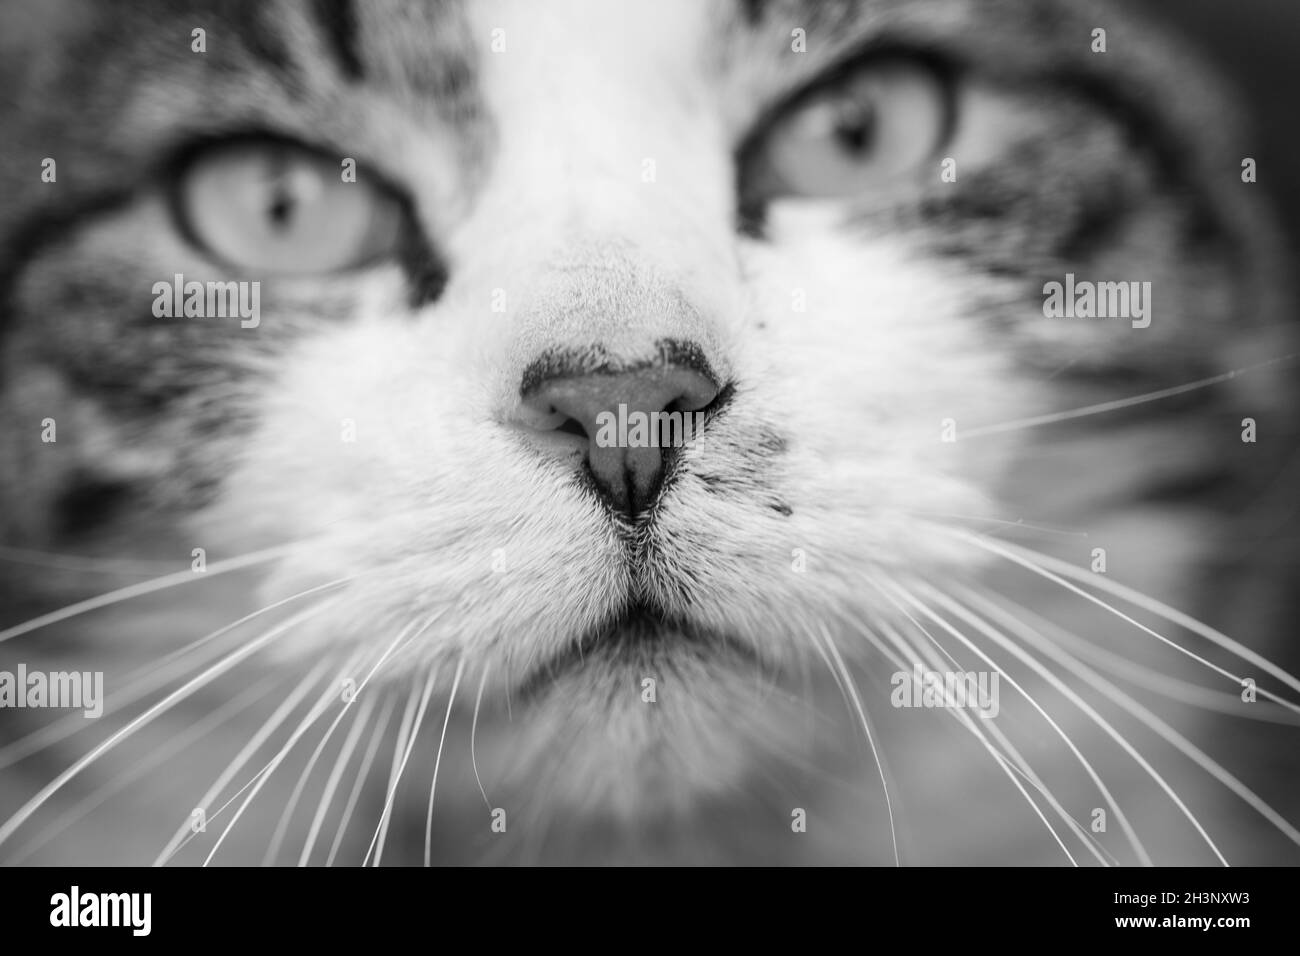 Close up portrait of a tabby and white cat with green eyes Stock Photo